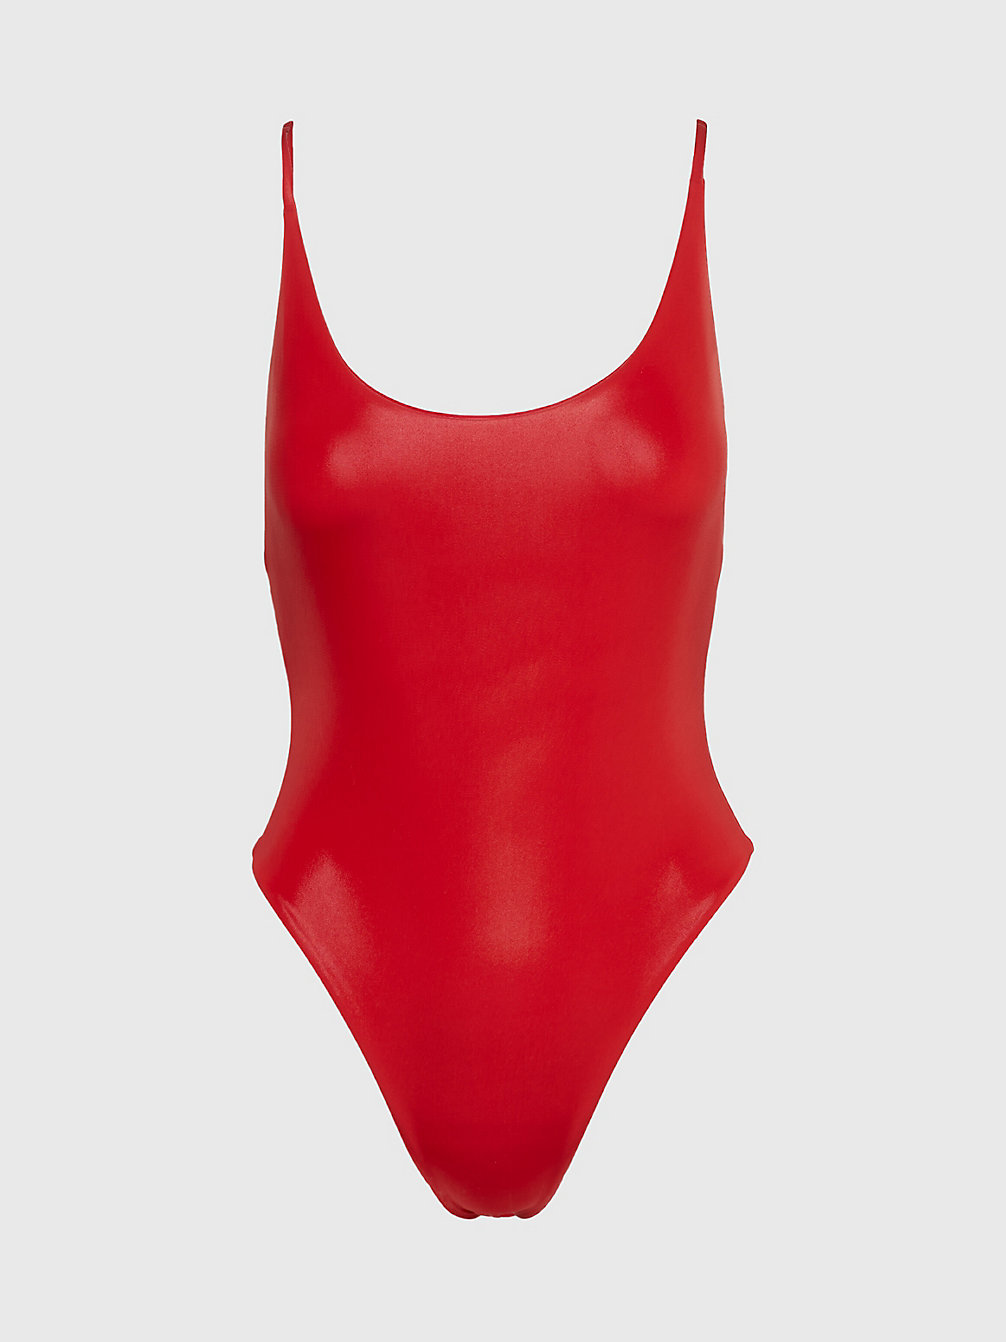 ORCHARD RED Racer Back Swimsuit - Neo Archive undefined women Calvin Klein